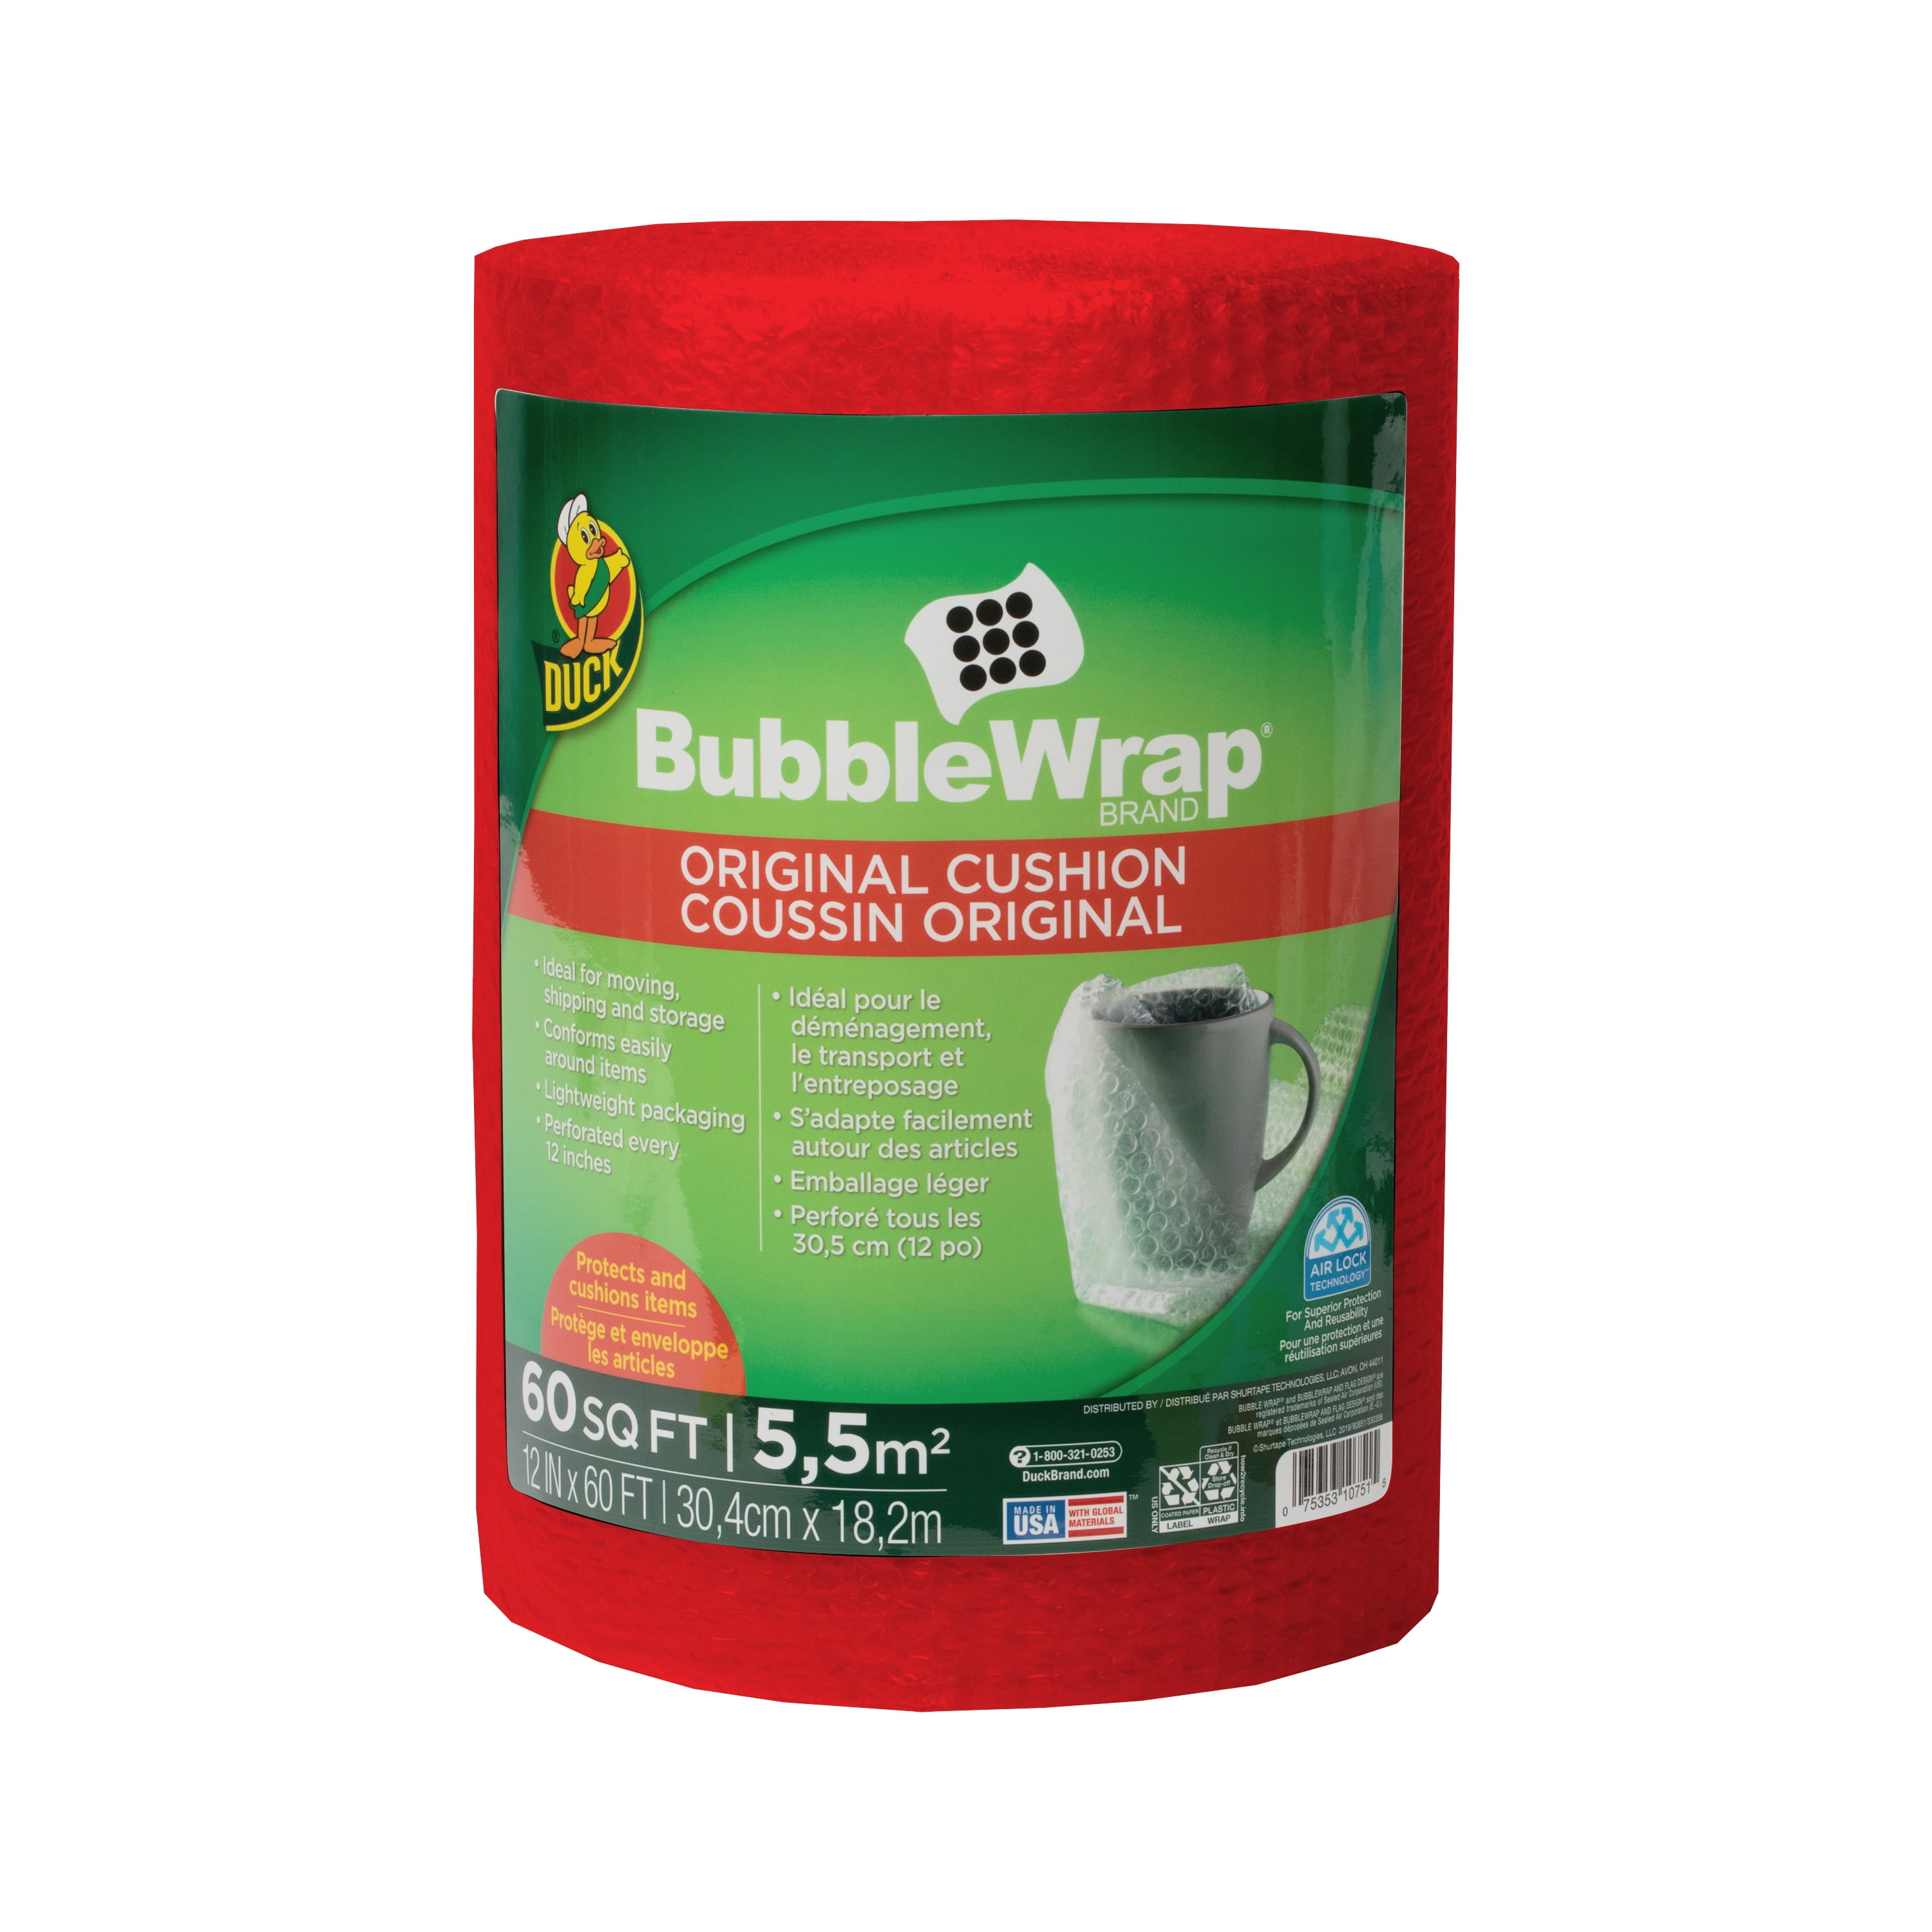 Perforated Every 12 12 x 15 1304499 5/16 Large Bubble Cushioning Duck Brand Large Bubble Wrap Roll